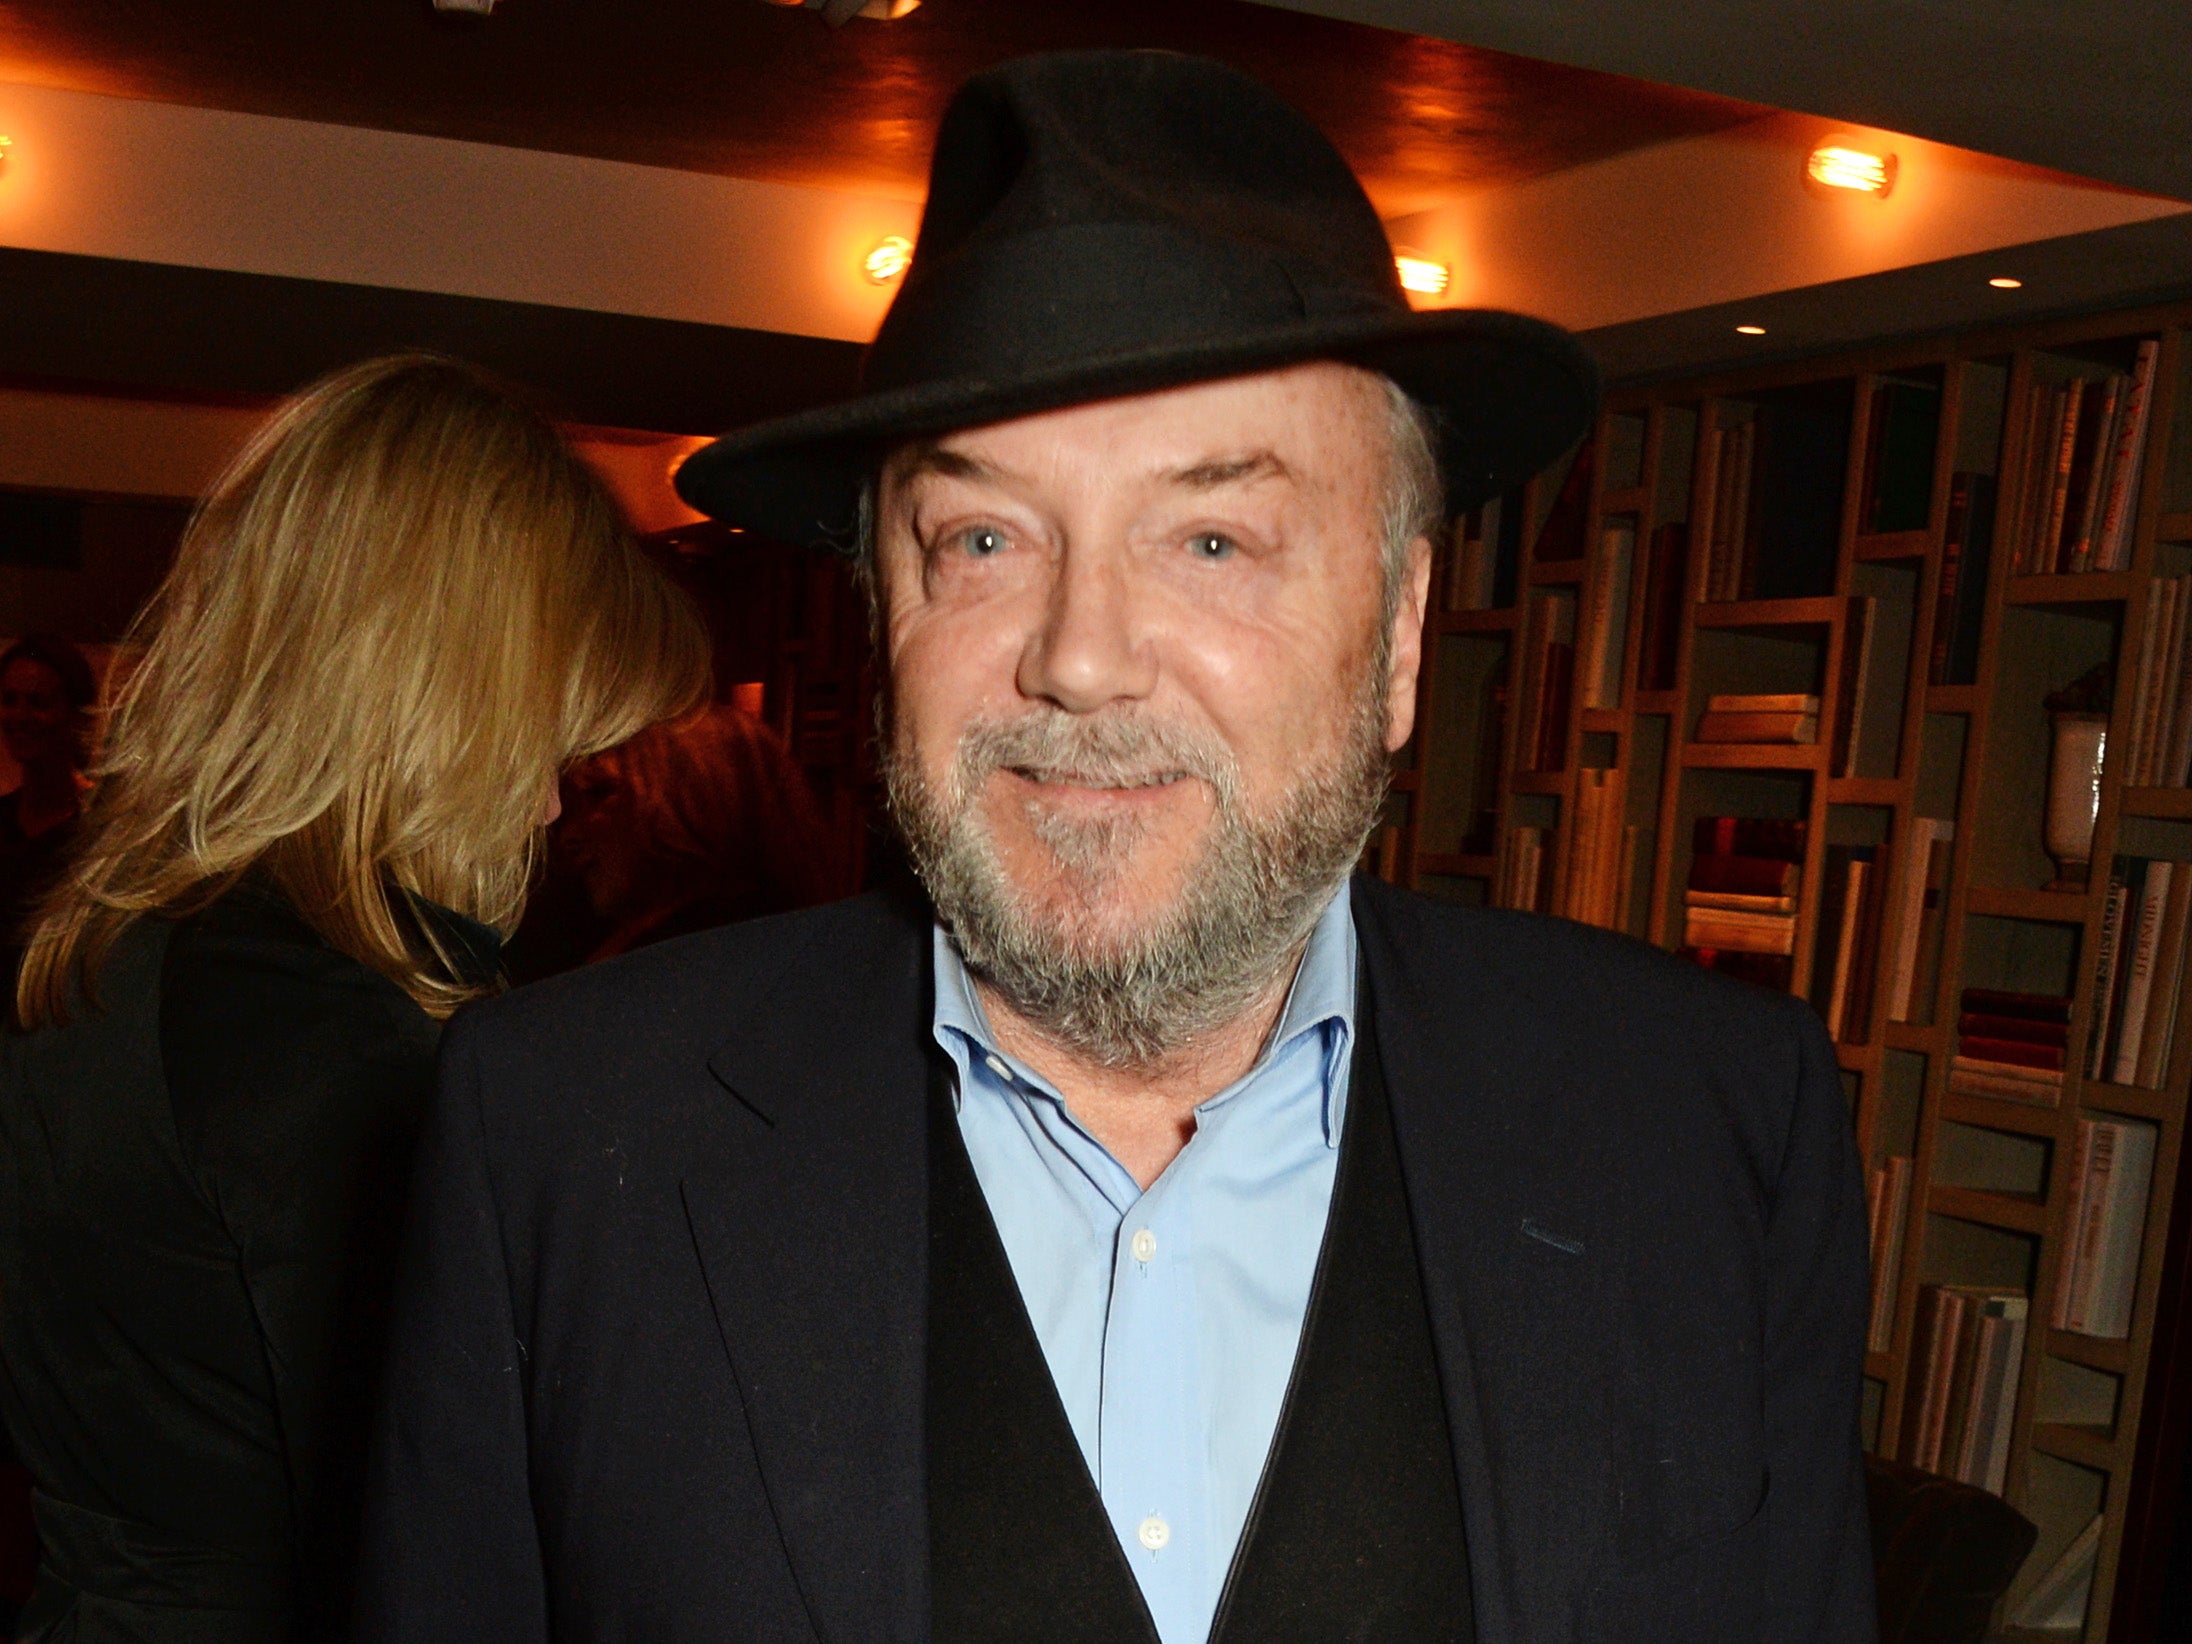 Mr Galloway was one of 12 candidates in the London mayoral elections won by Mr Khan